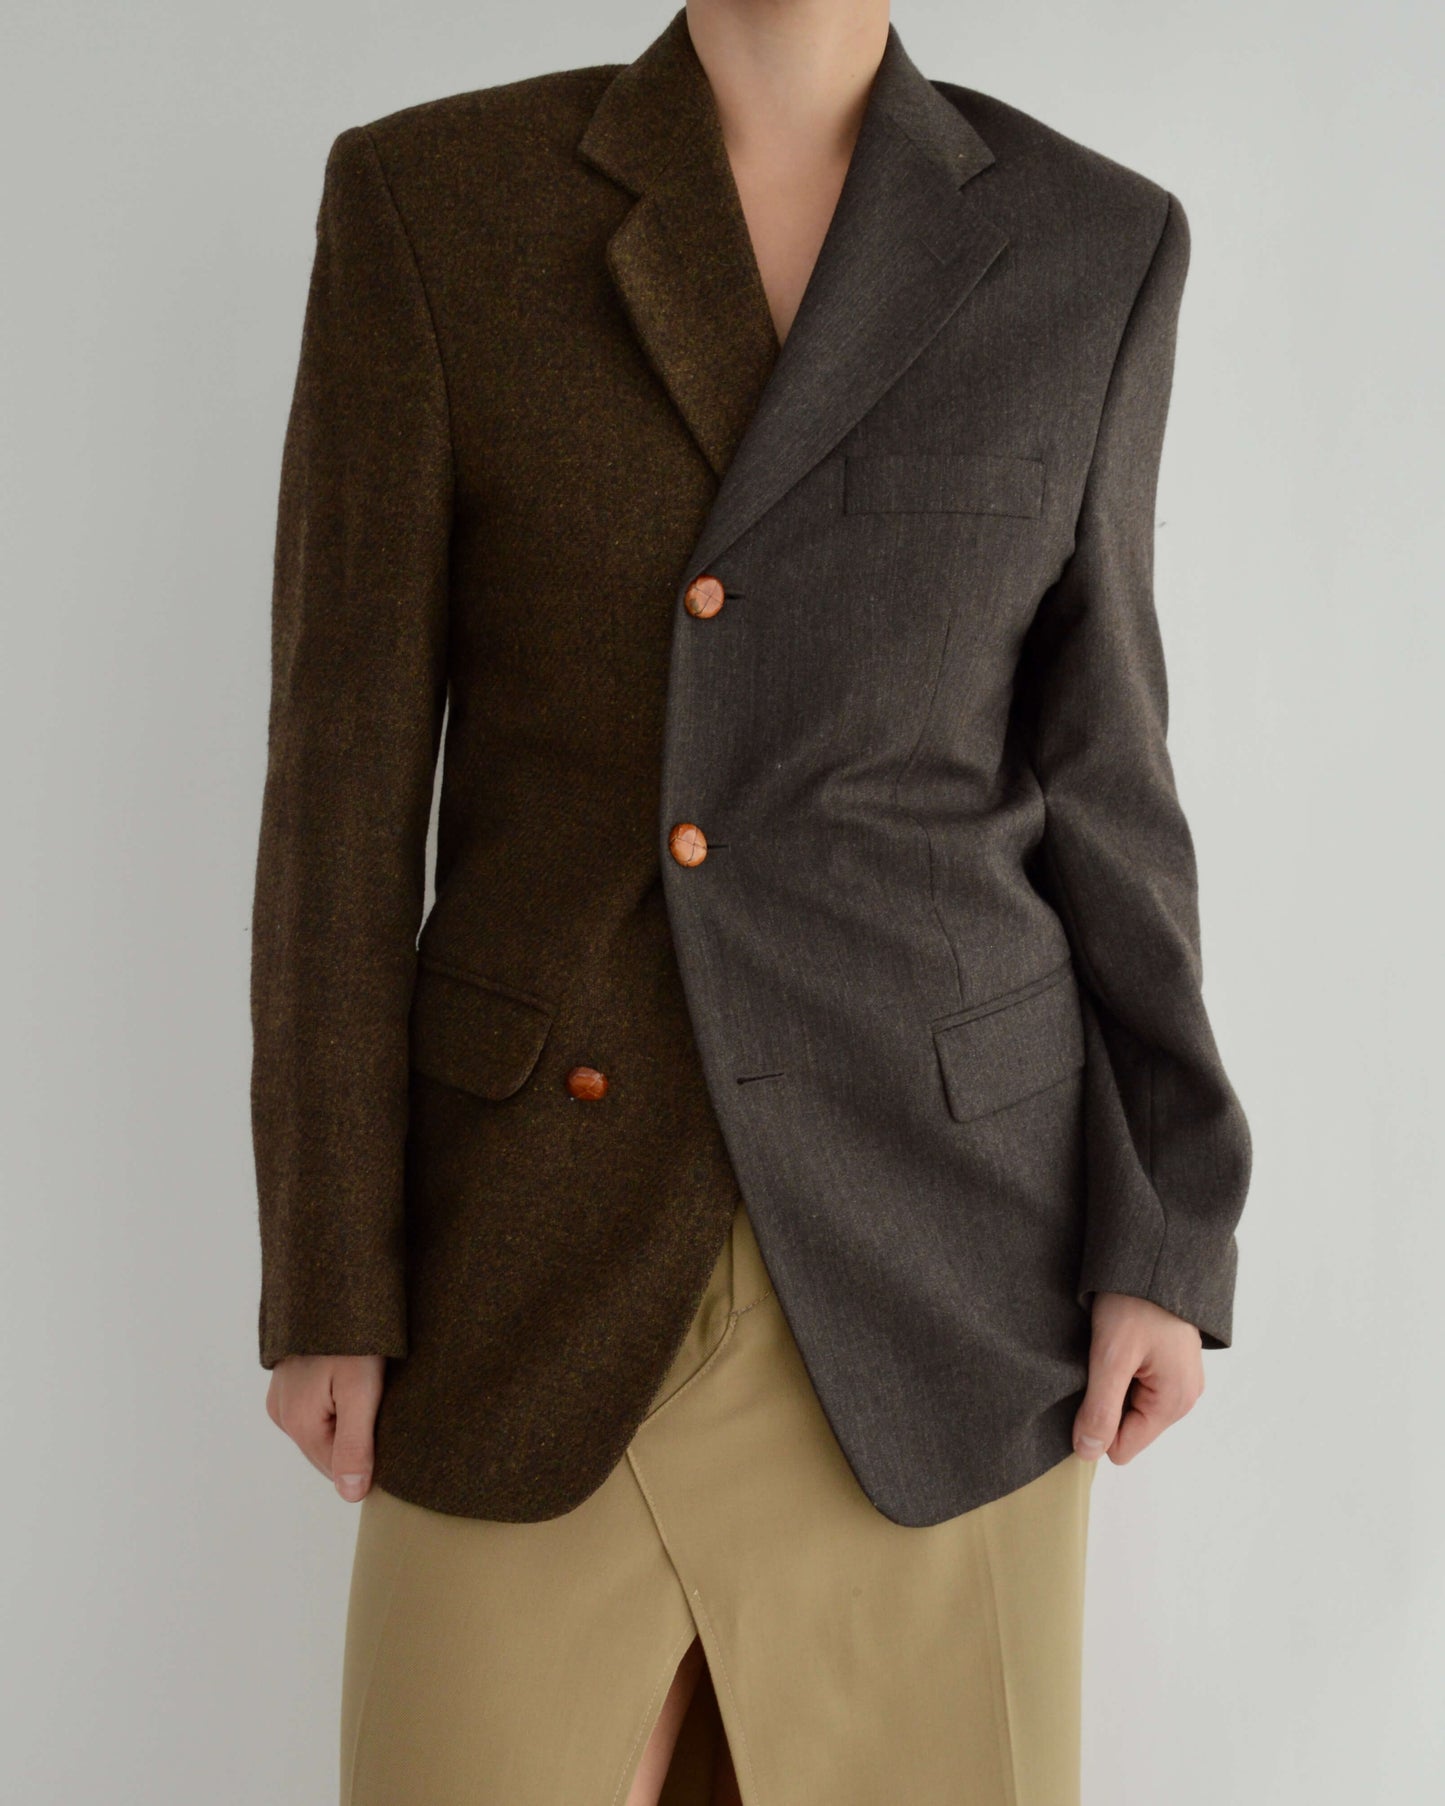 DUO Blazer - Brown Two Textured (XS/M)